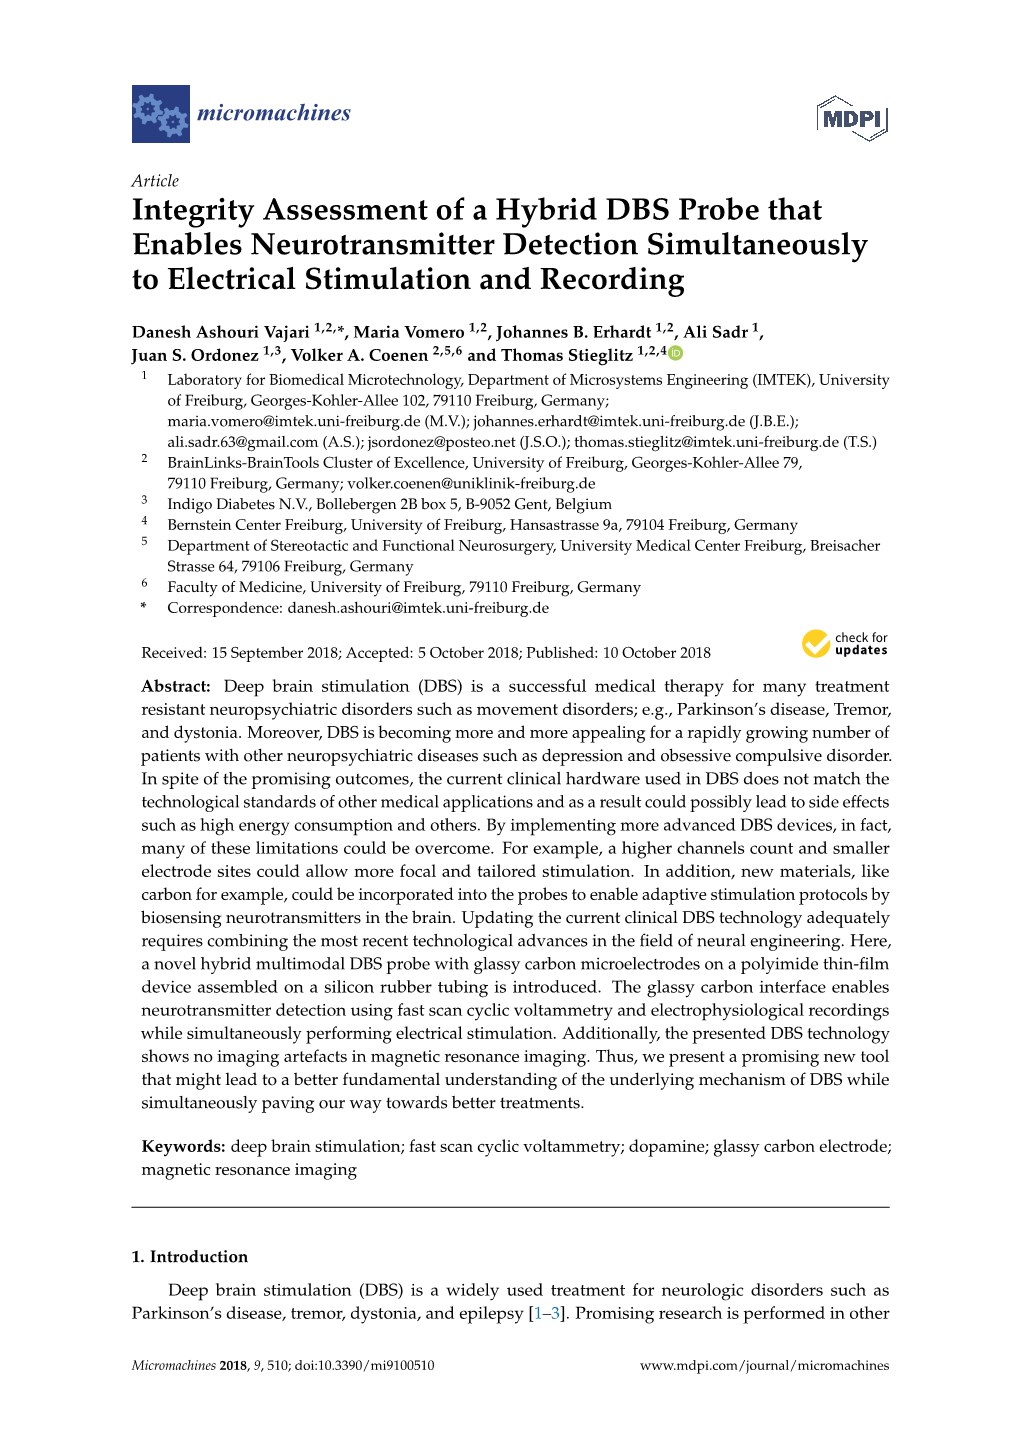 Integrity Assessment of a Hybrid DBS Probe That Enables Neurotransmitter Detection Simultaneously to Electrical Stimulation and Recording